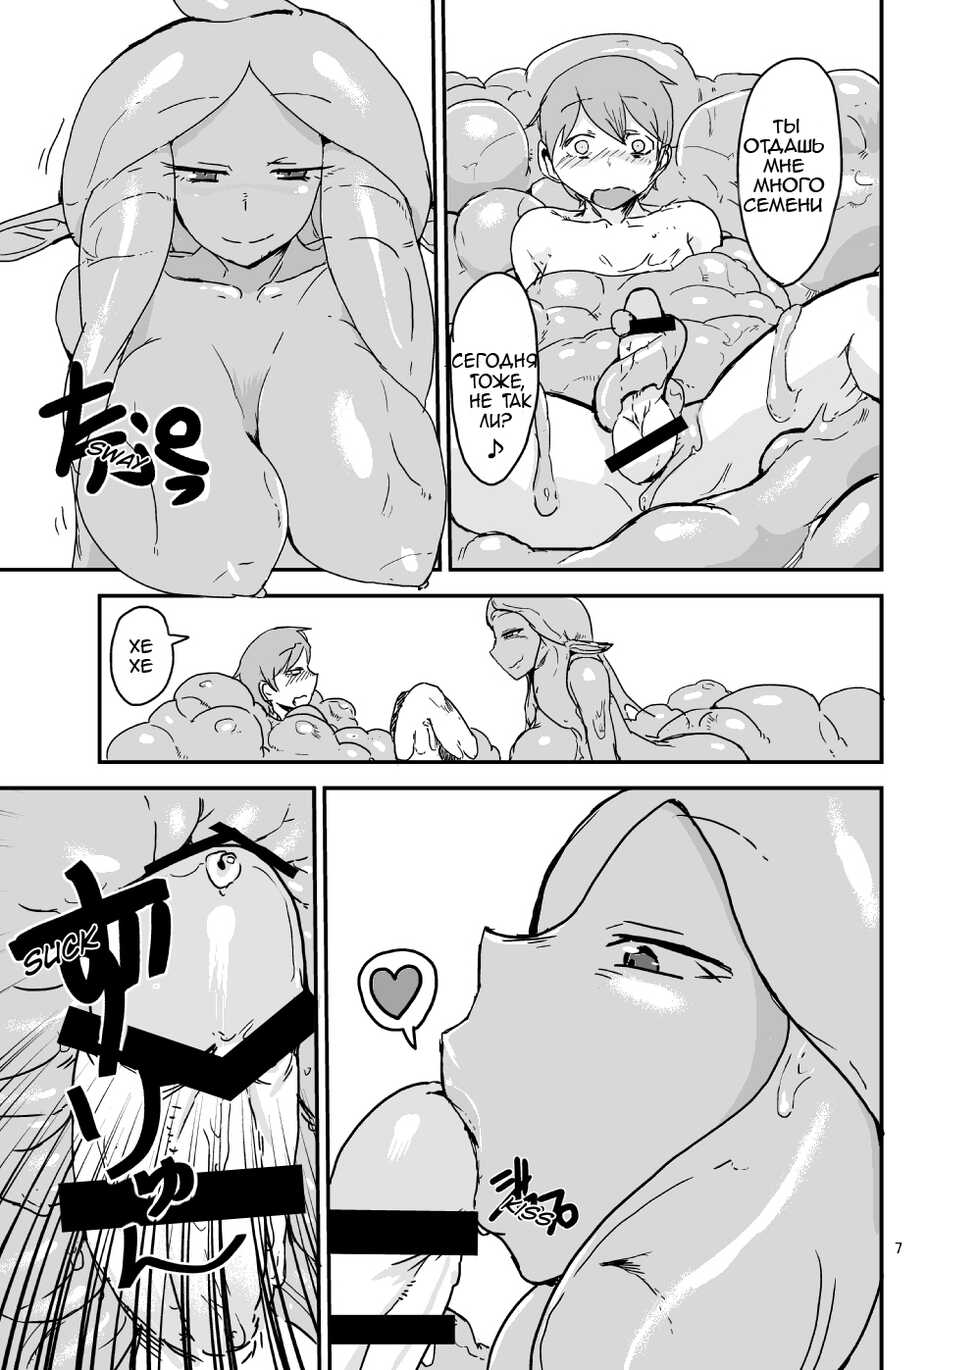 [Setouchi Pharm (Setouchi)] Mon Musu Quest! Beyond The End 2 (Monster Girl Quest!) [Russian] [﻿stycler94] [Digital] - Page 6